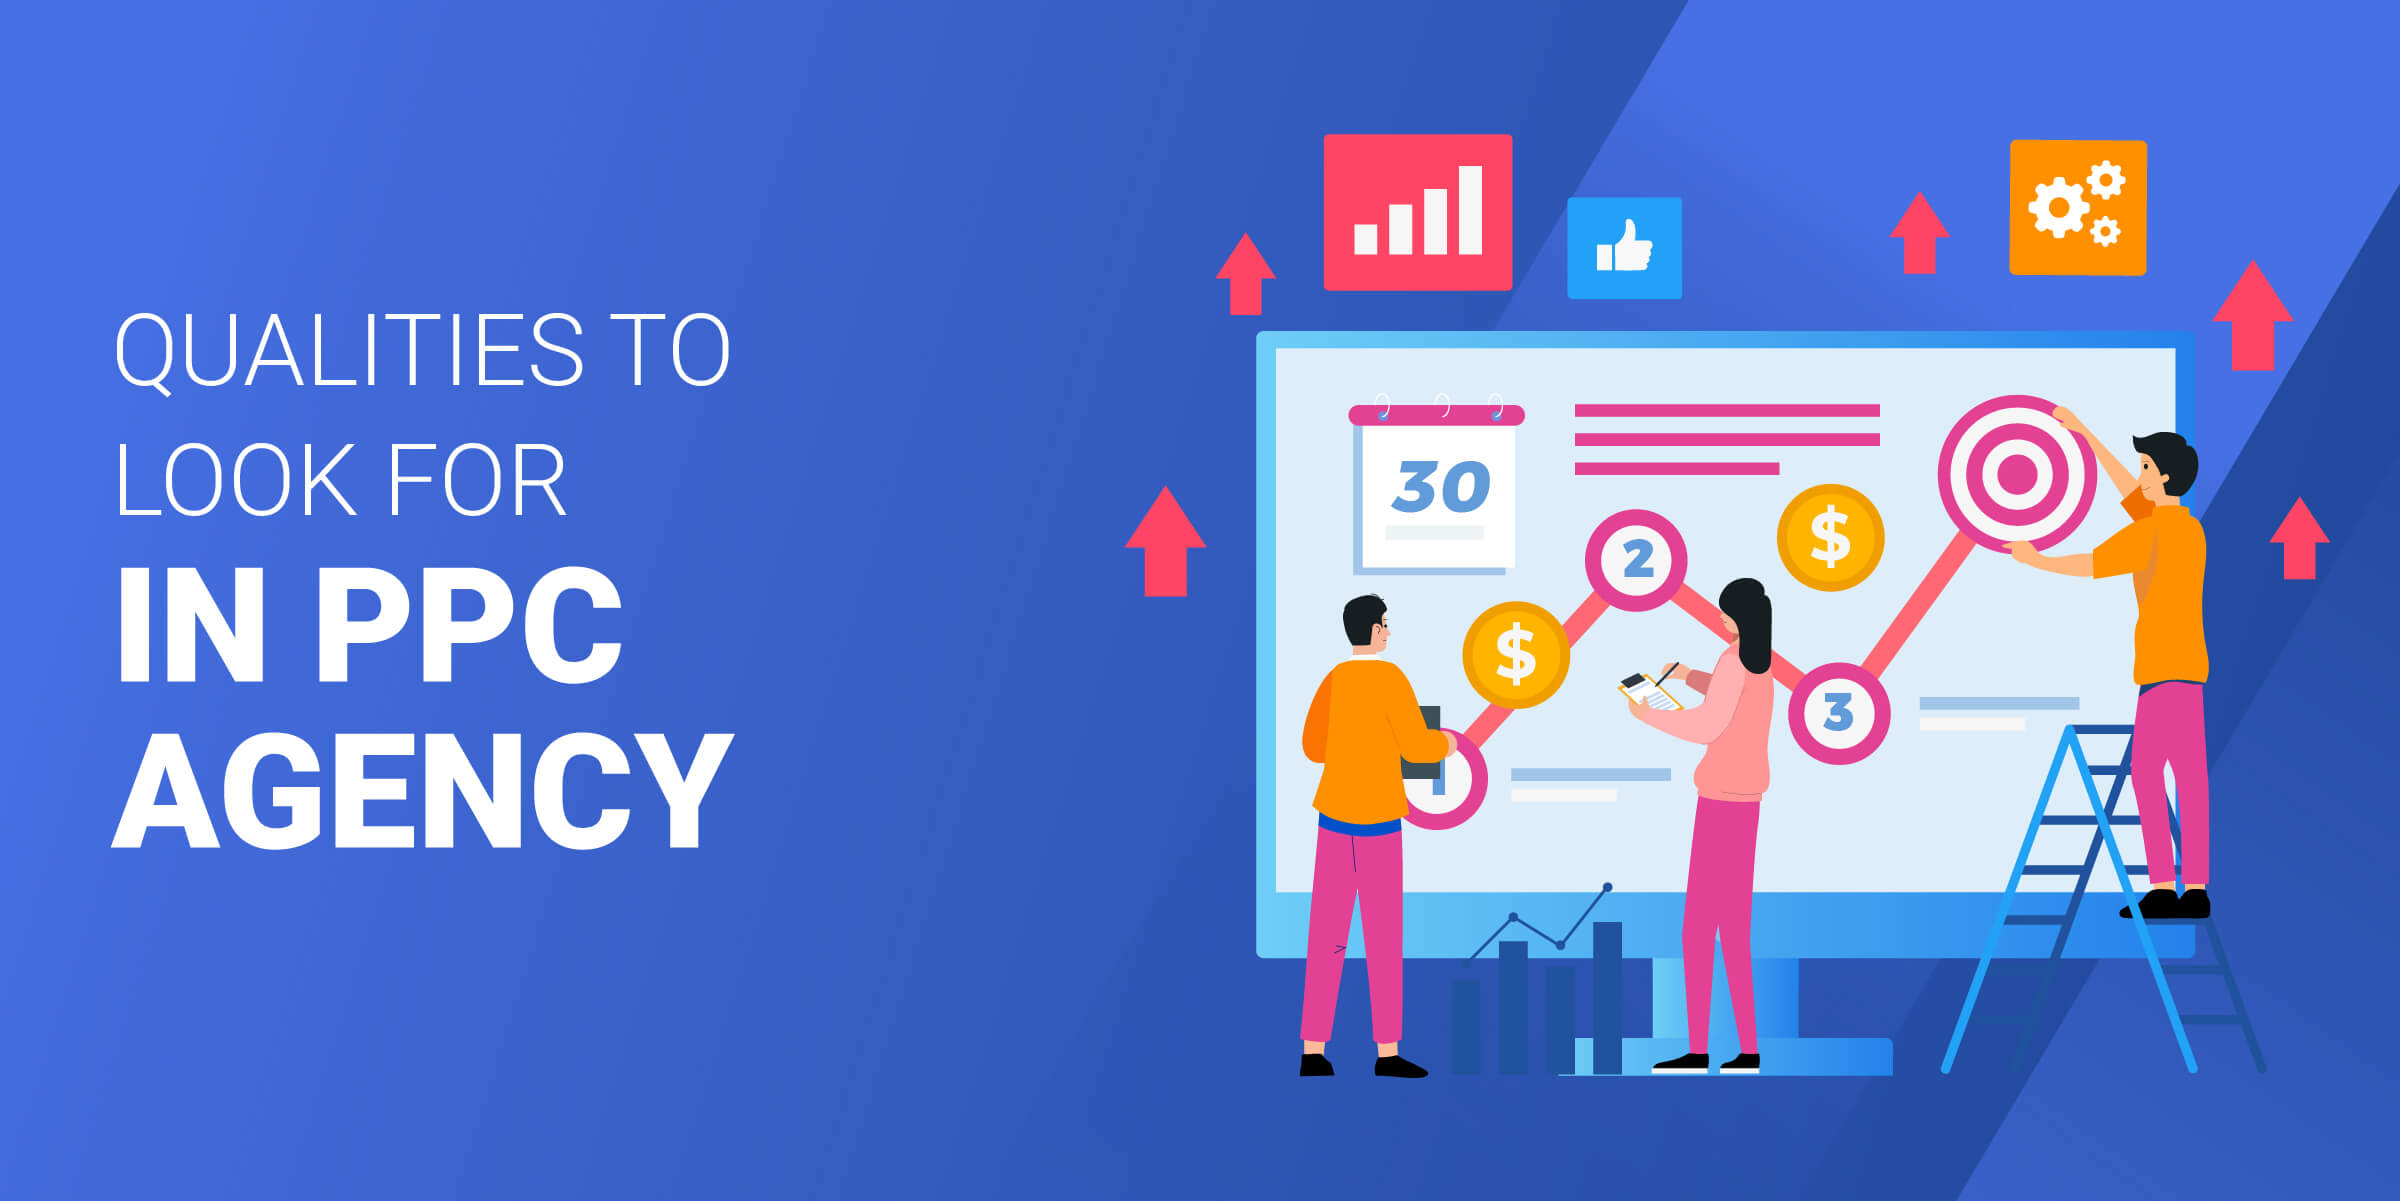 Qualities to Look for in PPC Agency